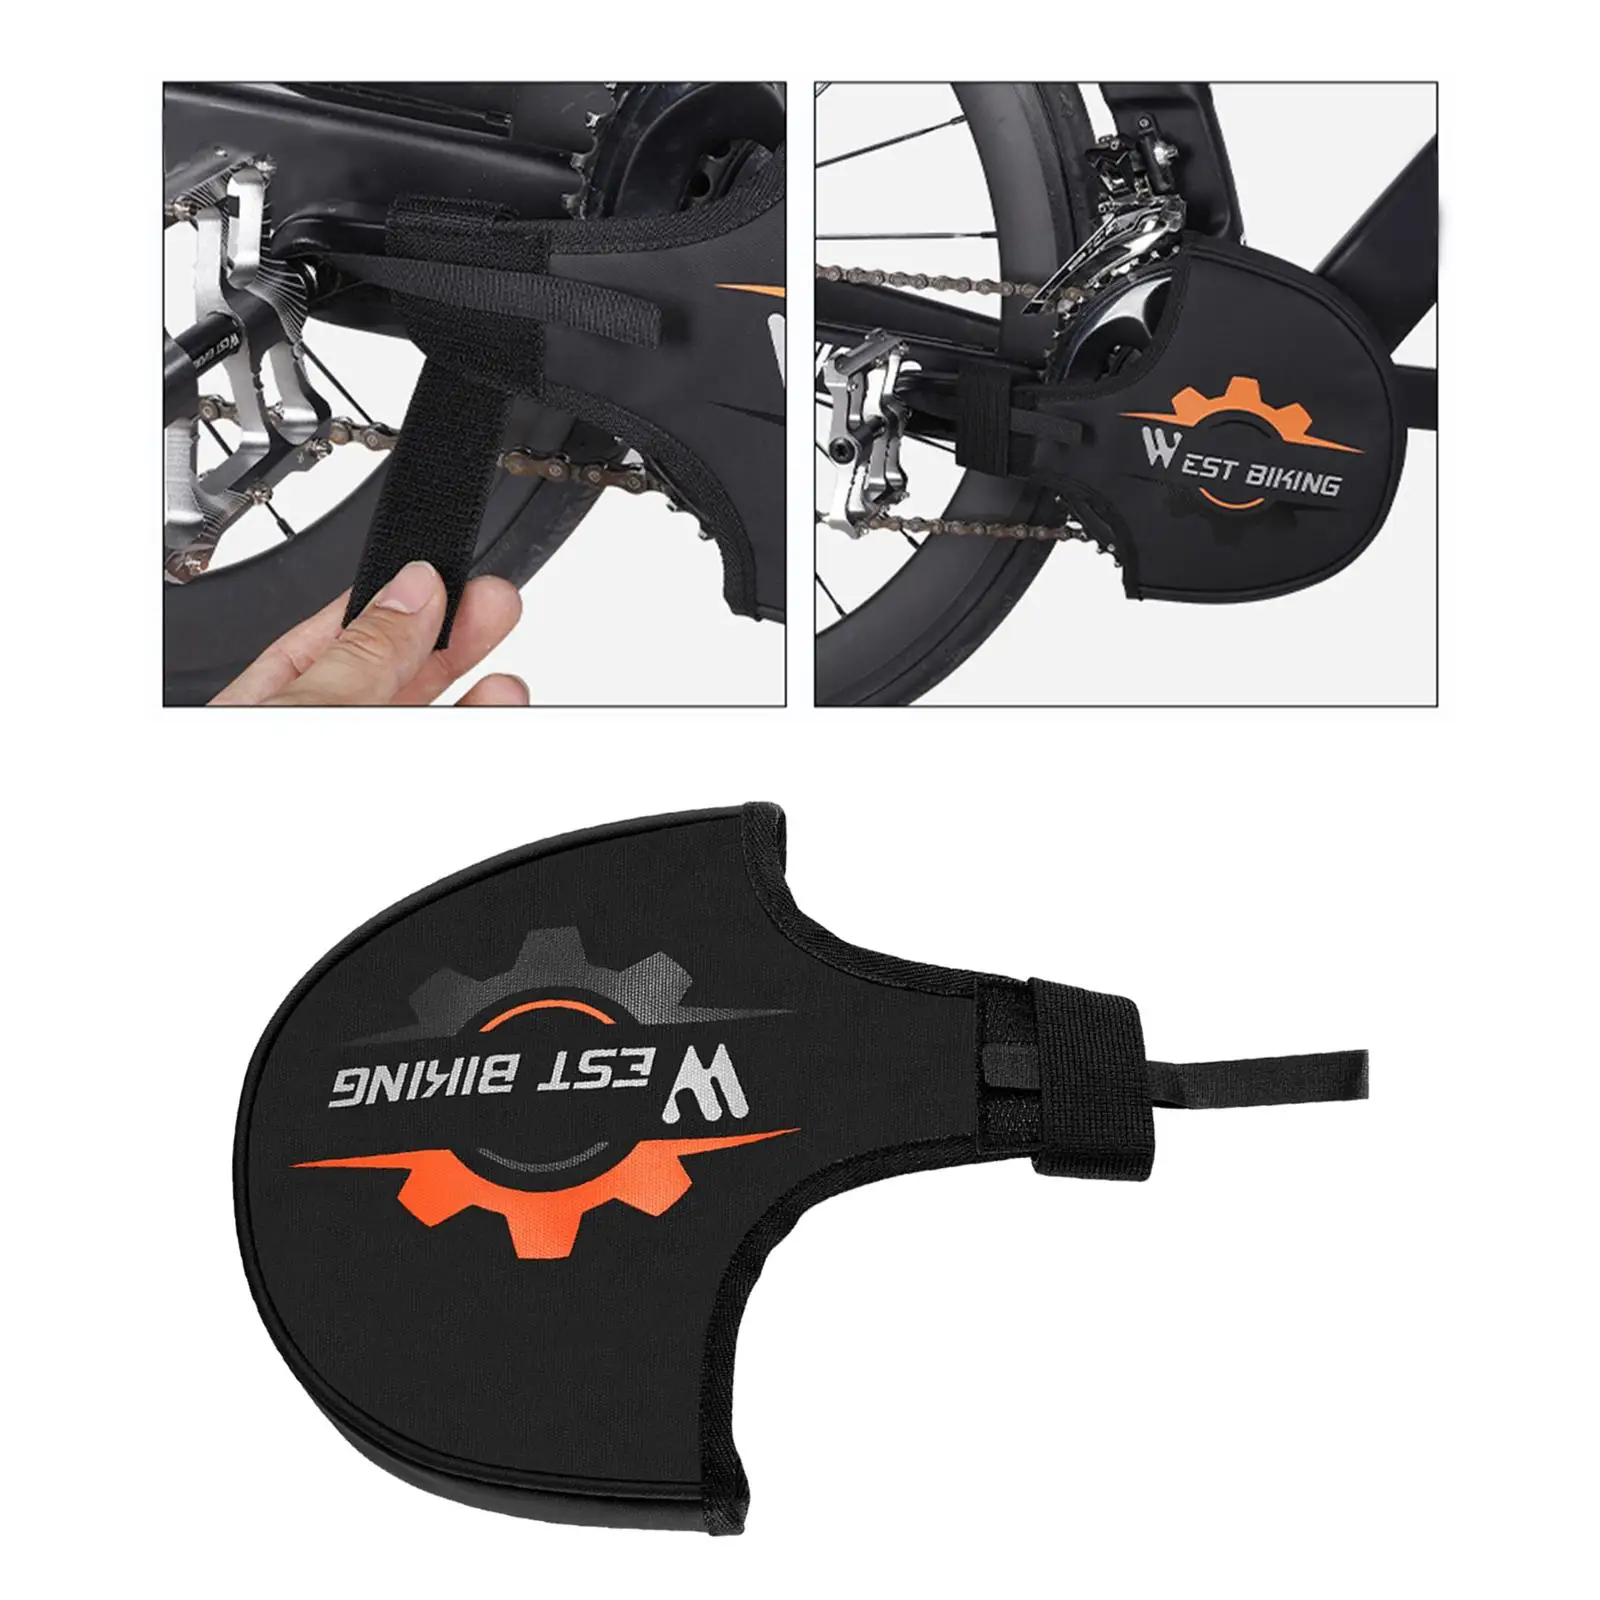 MTB Bike Crankset Protector Sprocket Cover Pad Bicycle Cycling Accessories Protective Case Anti Scratch for Mountain Road Bike